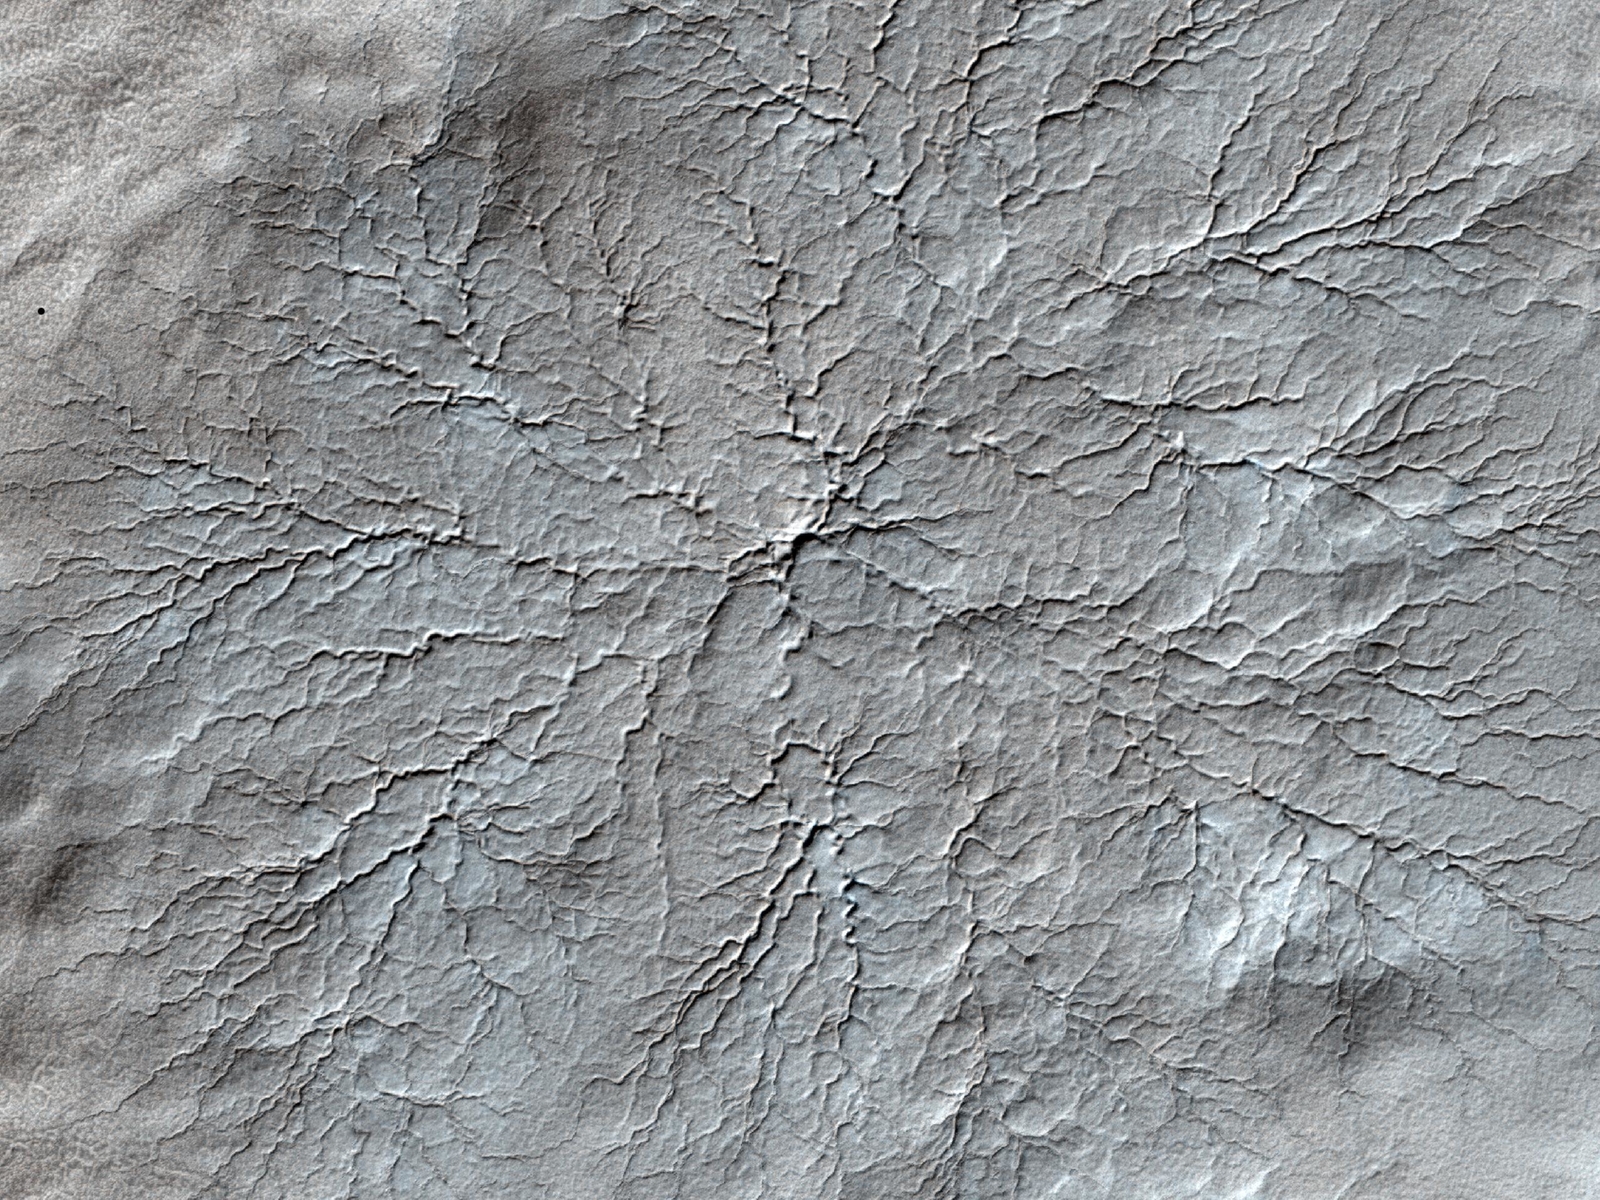 This HiRISE image shows erosional features formed by seasonal frost near the south pole of Mars.